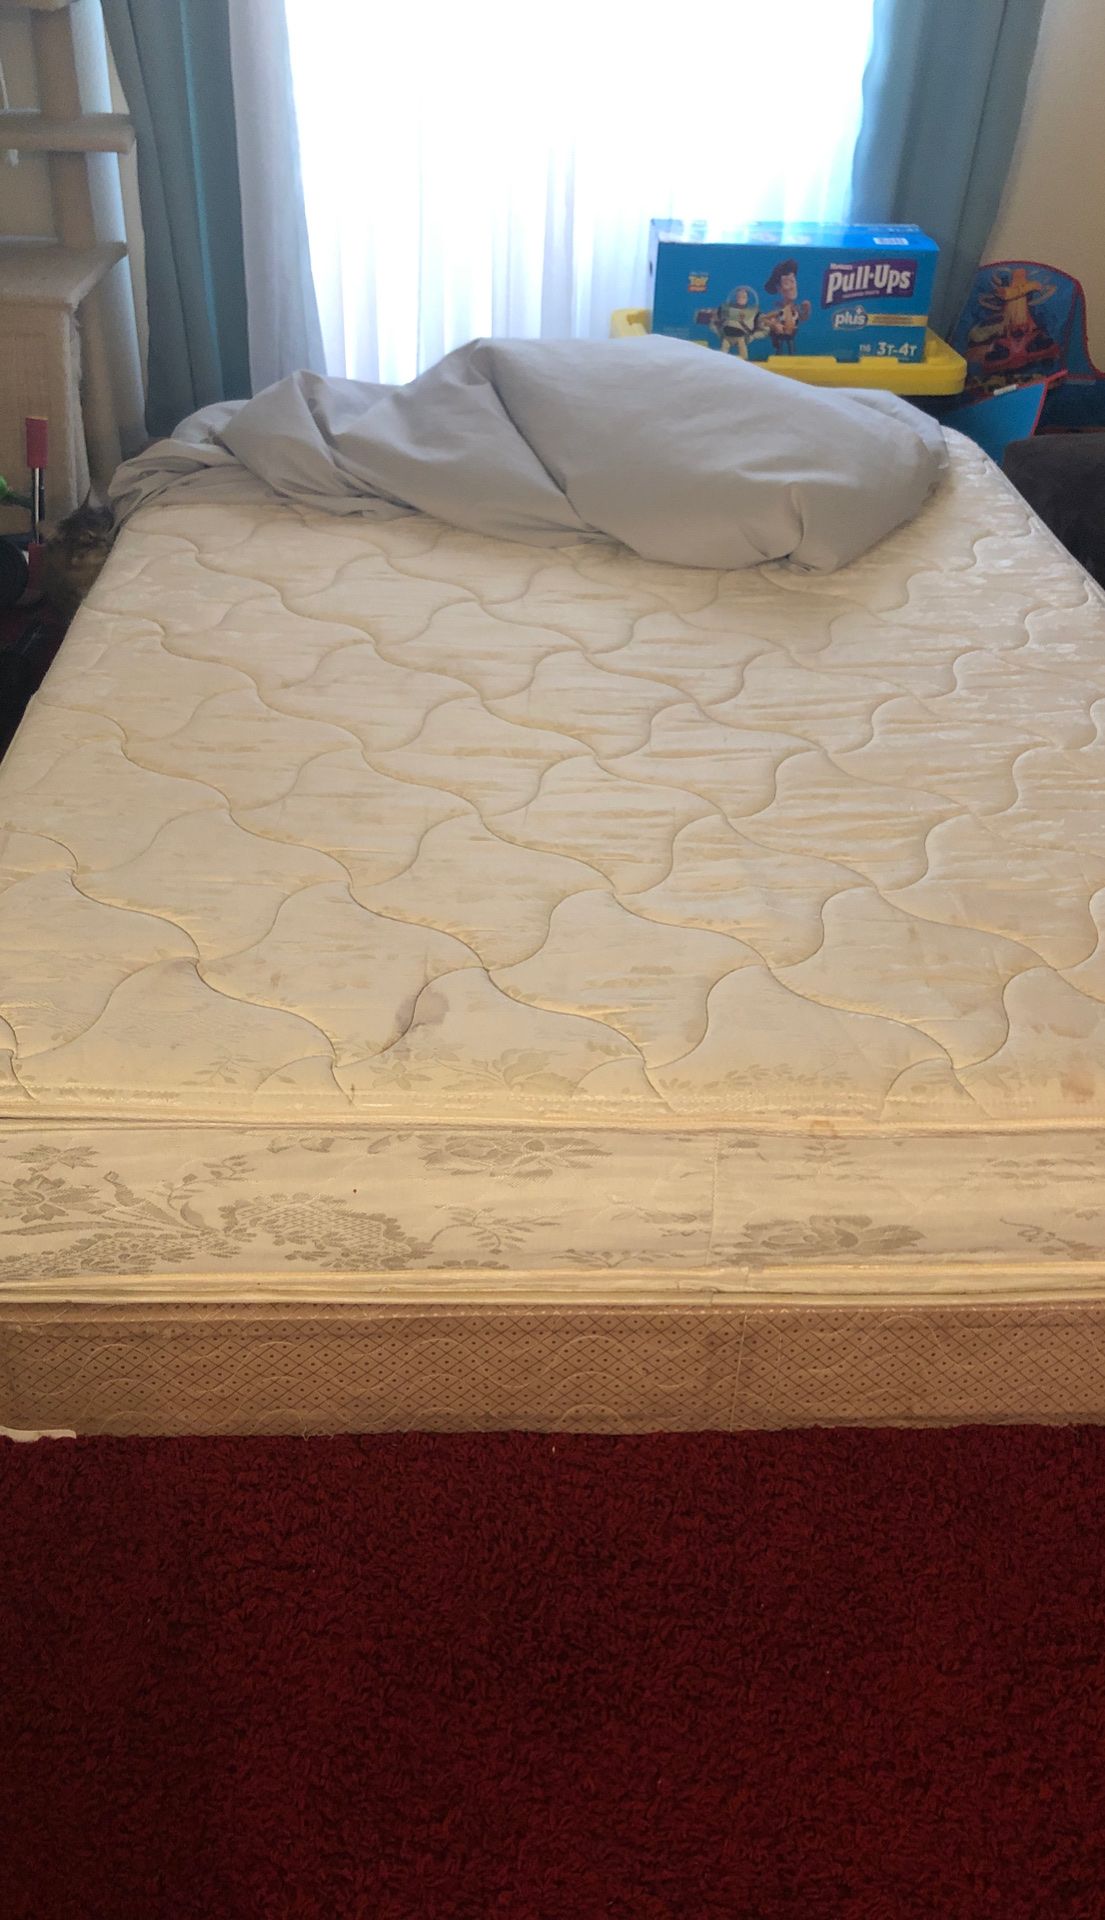 FREE.....Queen size bed with box spring used.... PICK UP ONLY!!!